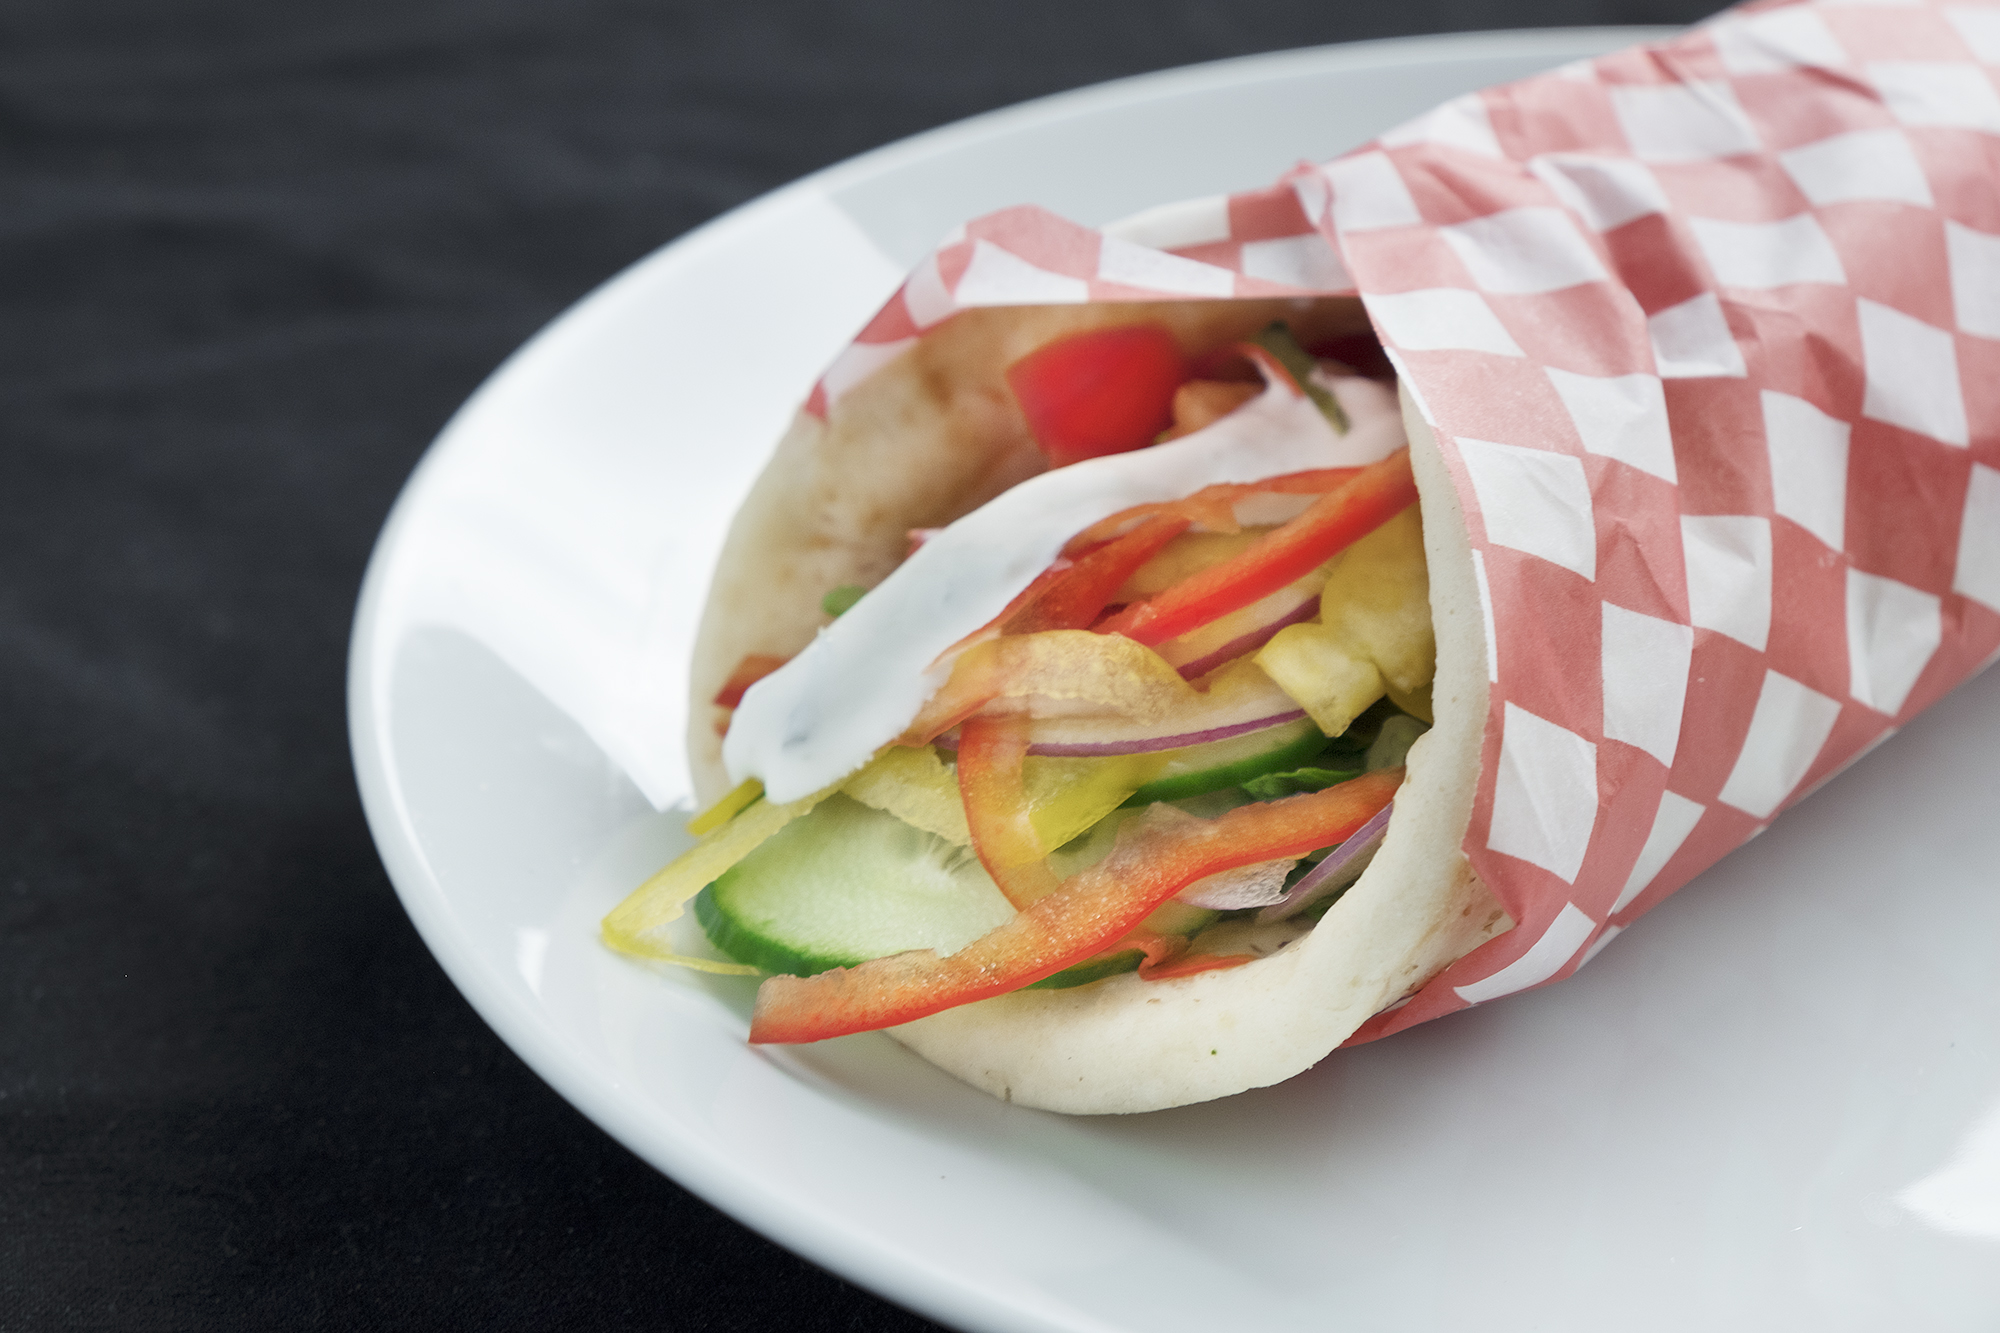 A vegetarian take on a delish Greek delicacy. This gyro makes the perfect lunch time companion; forget take-out.